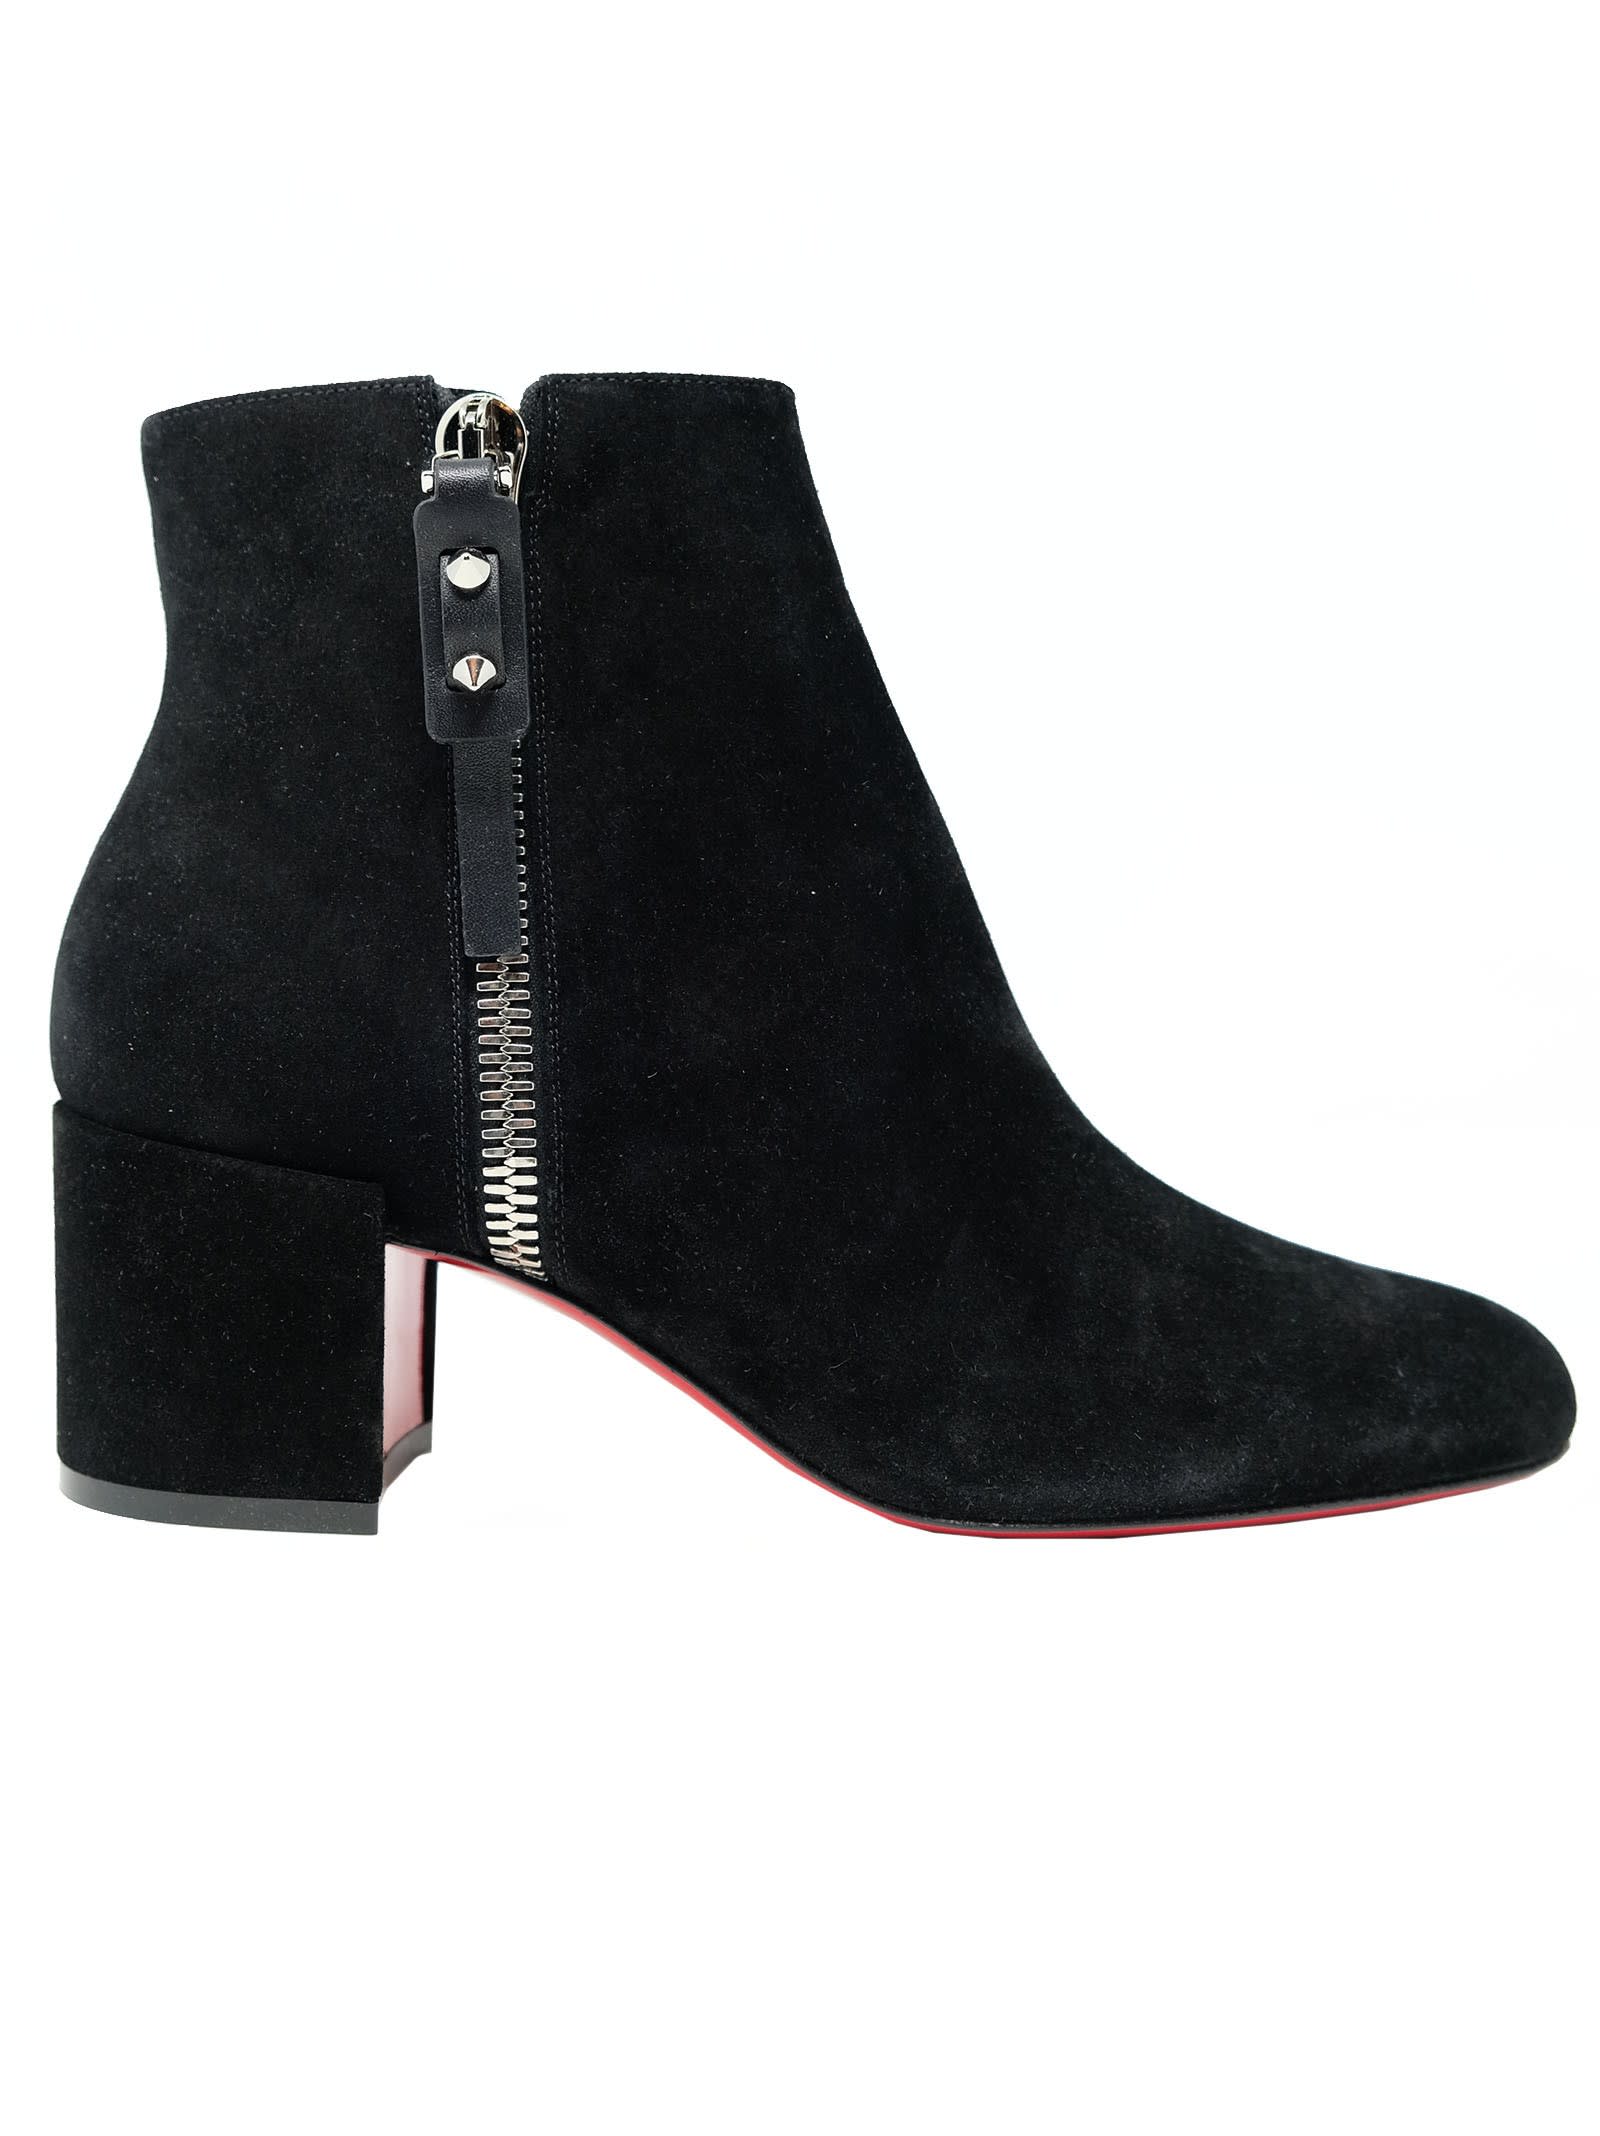 Christian Louboutin Black Suede Ziptotal 55 Crosta Ankle Boots